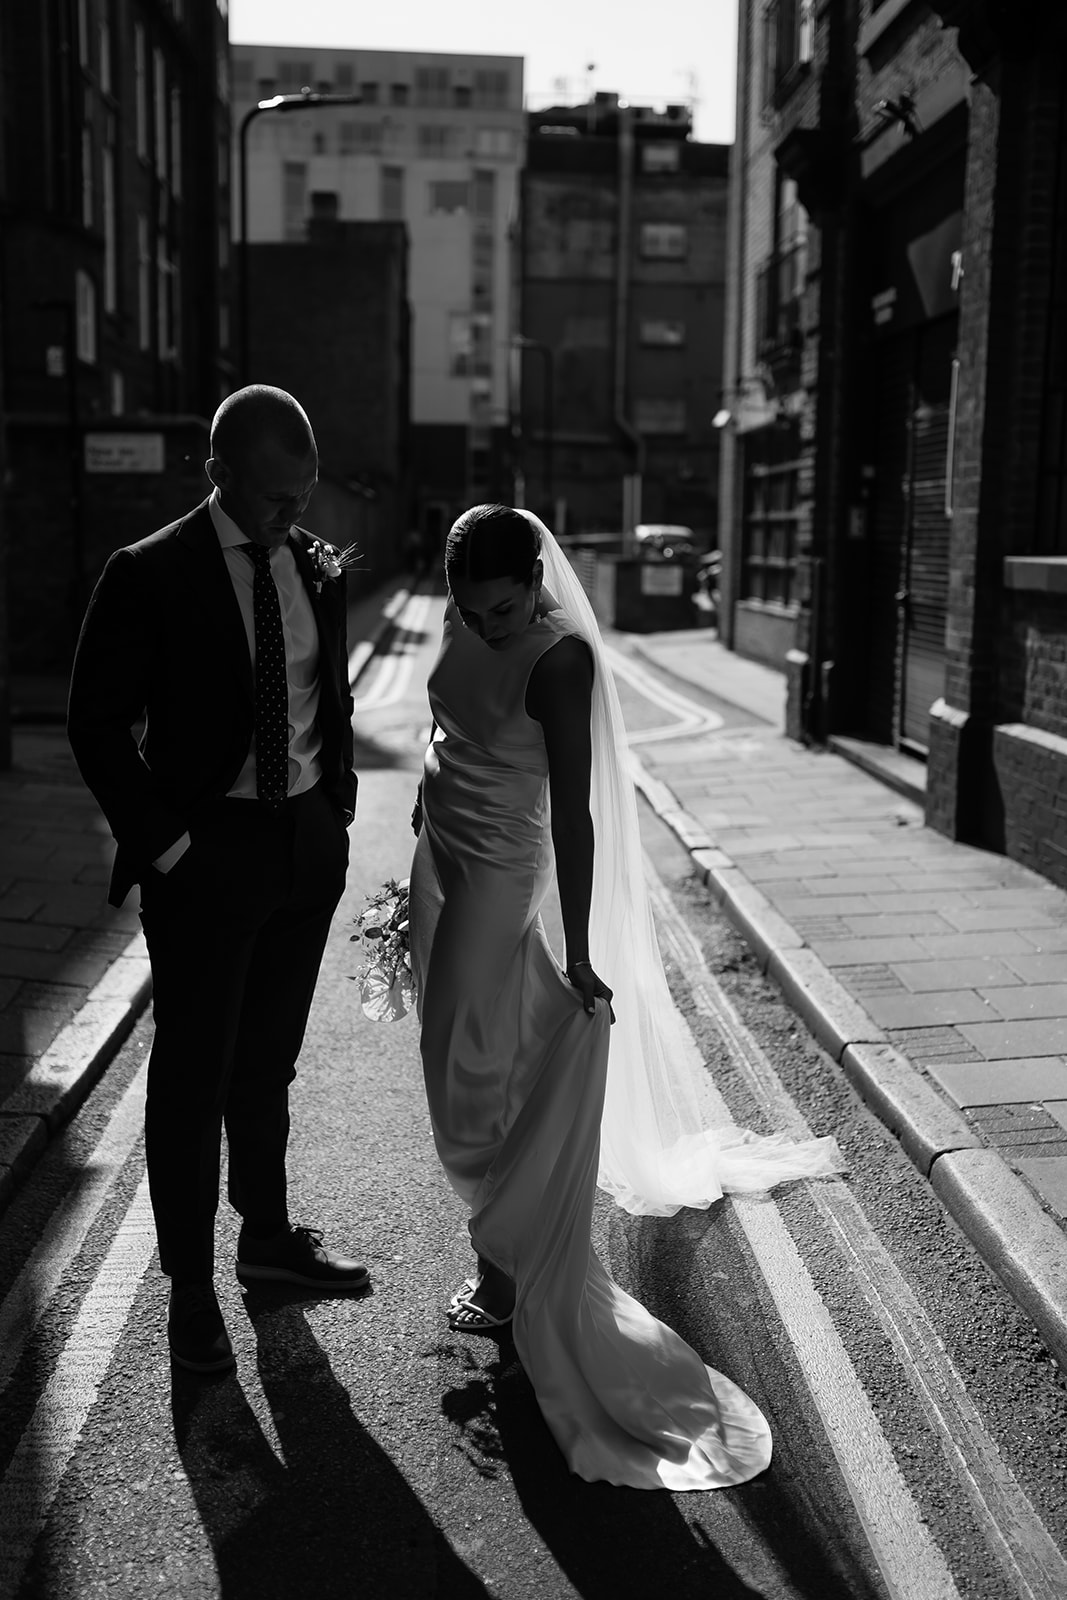 unique, cinematic wedding portrait in black and white of bride and groom outside of Shoredtich Studios